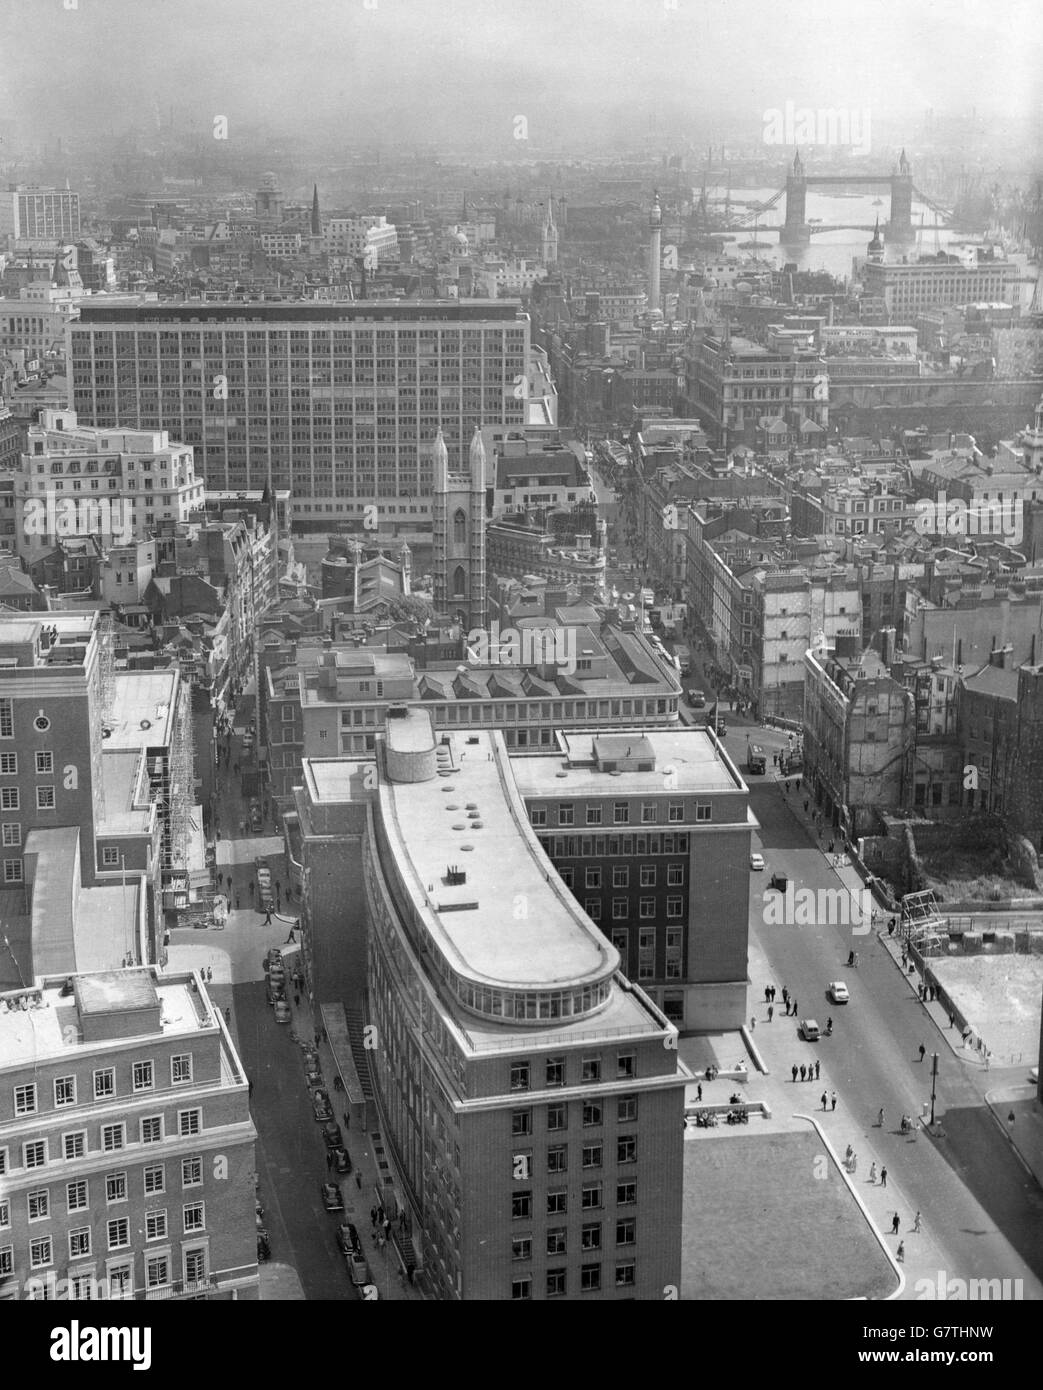 View of the new Bank of England extension building in New Change, London. The massive new building is built on the a 2 and half acre site which formerly housed offices and shops but was badly damaged in the Blitz. This image was taken from the dome of St. Paul's Cathedral. Tower Bridge can been see in the far distance. Stock Photo